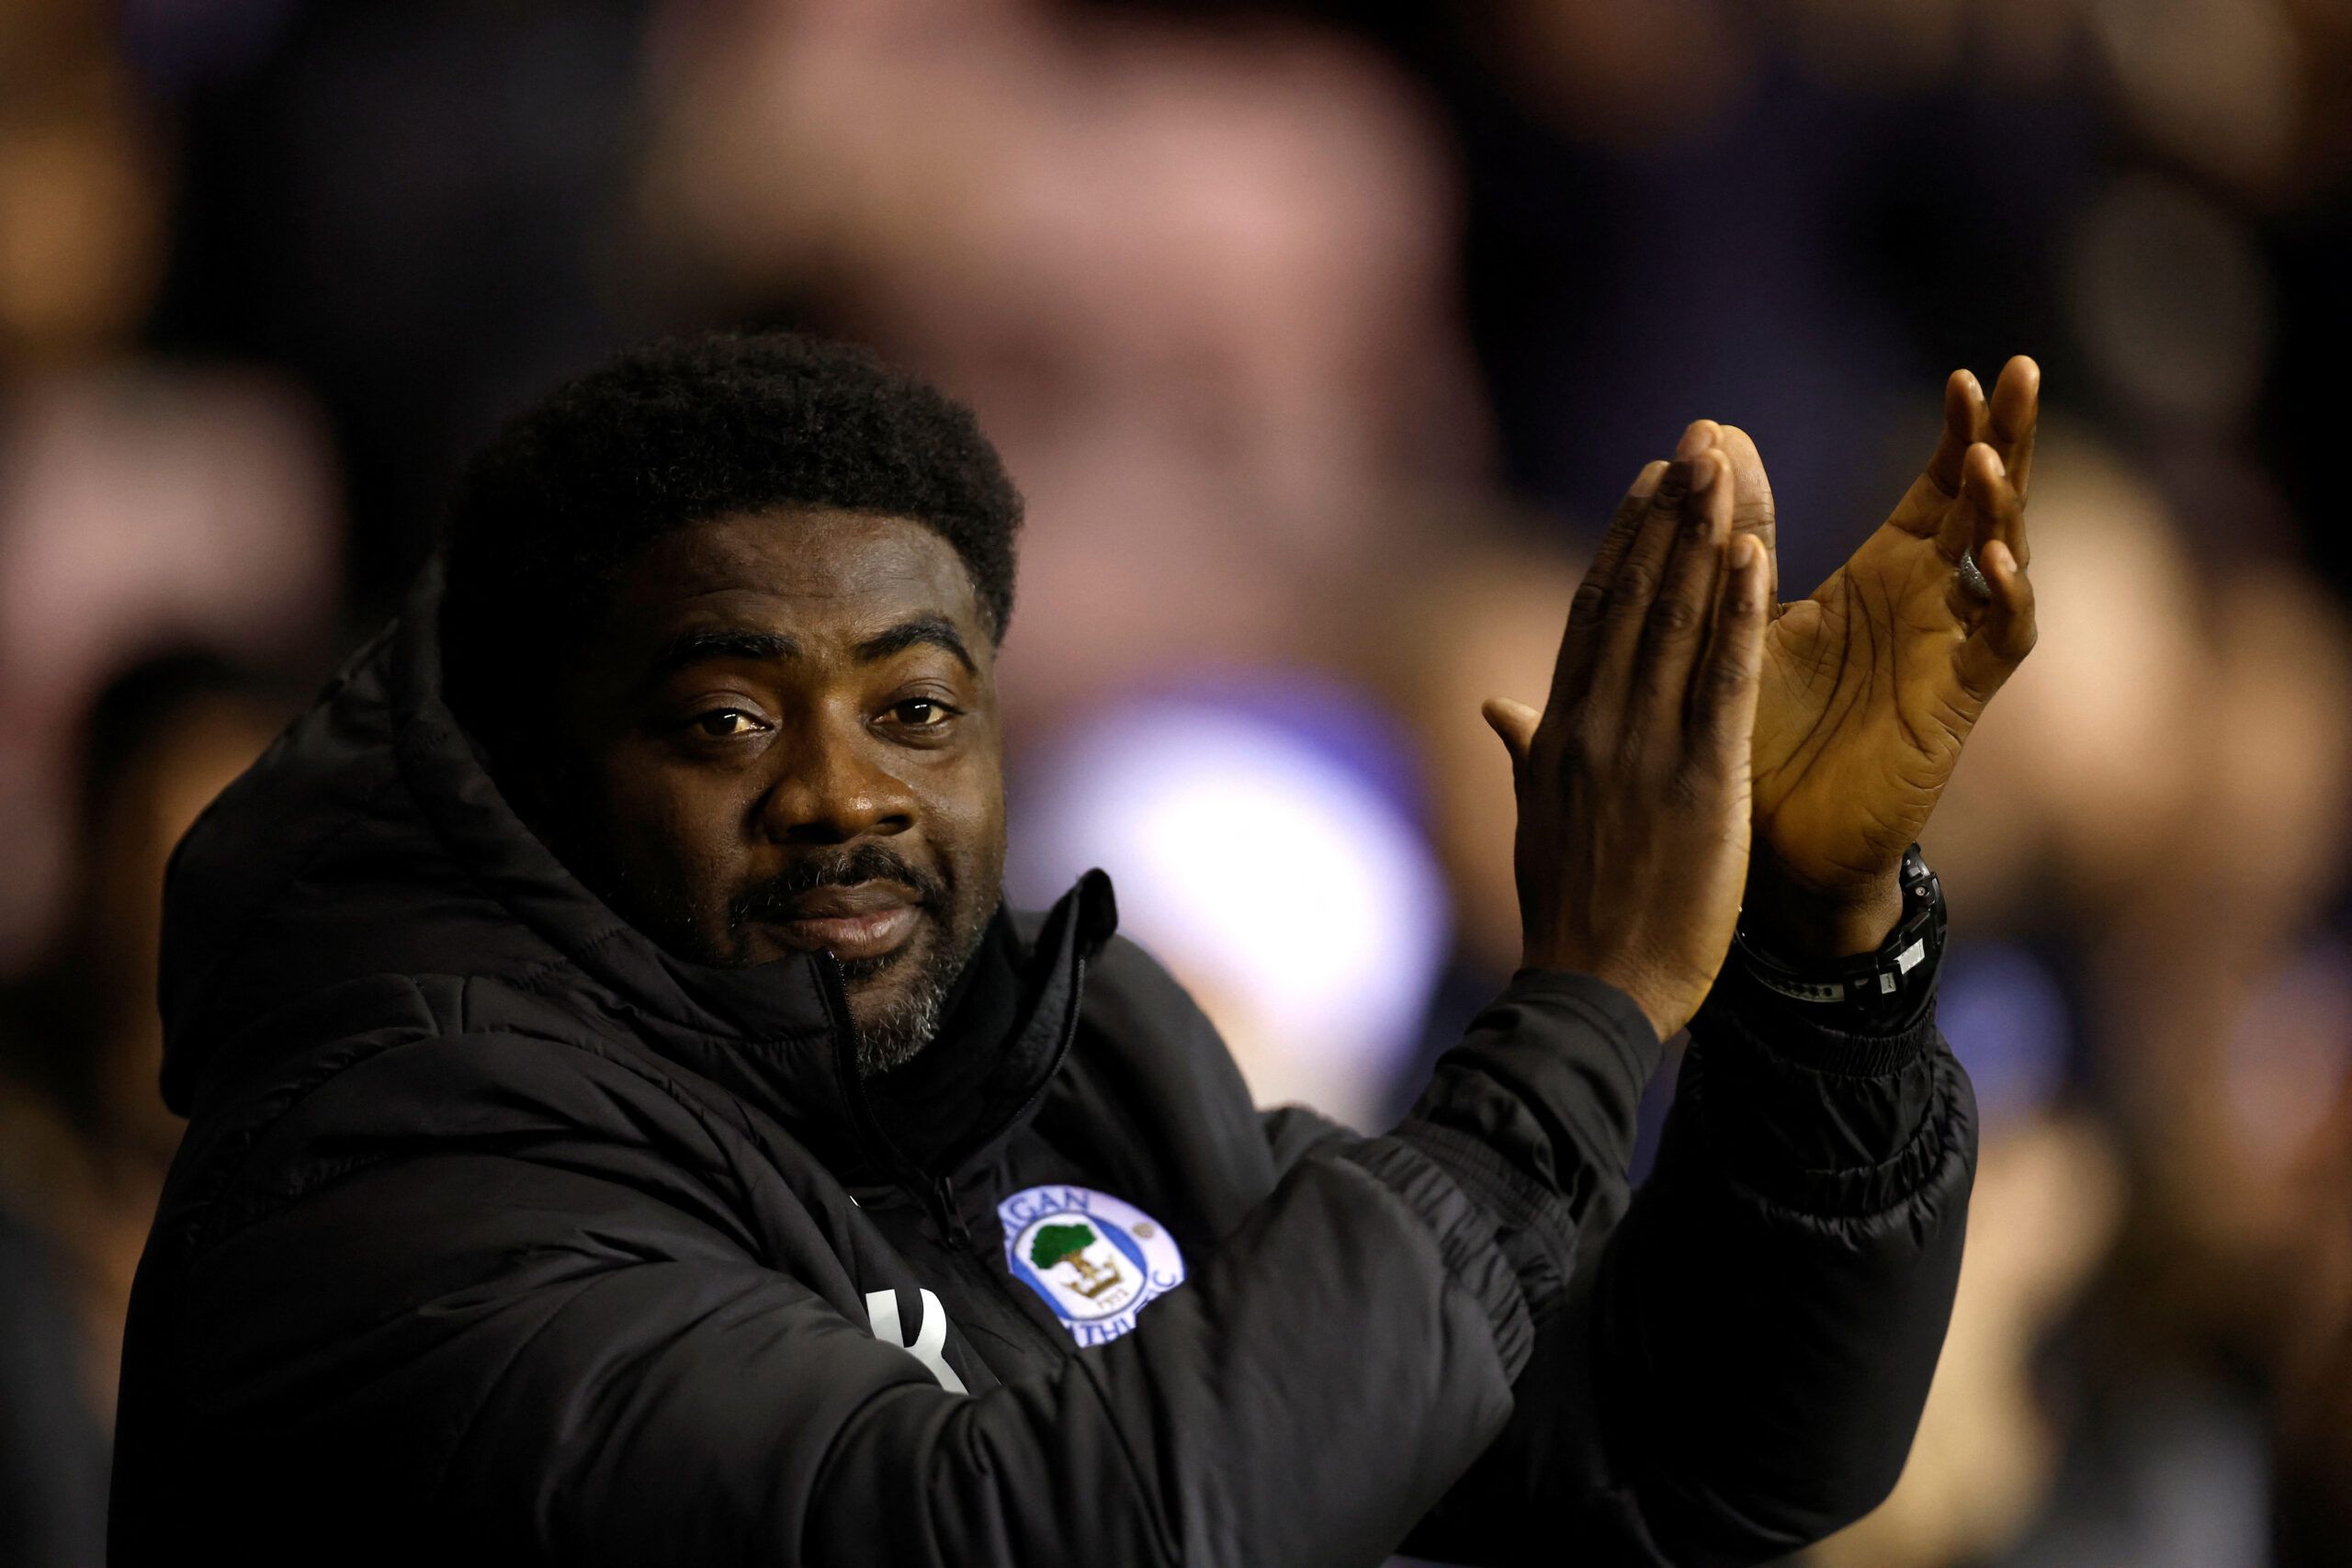 Soccer Football - Championship - Wigan Athletic v Sheffield United - DW Stadium, Wigan, Britain - December 19, 2022 Wigan Athletic manager Kolo Toure during the match Action Images/Jason Cairnduff  EDITORIAL USE ONLY. No use with unauthorized audio, video, data, fixture lists, club/league logos or 